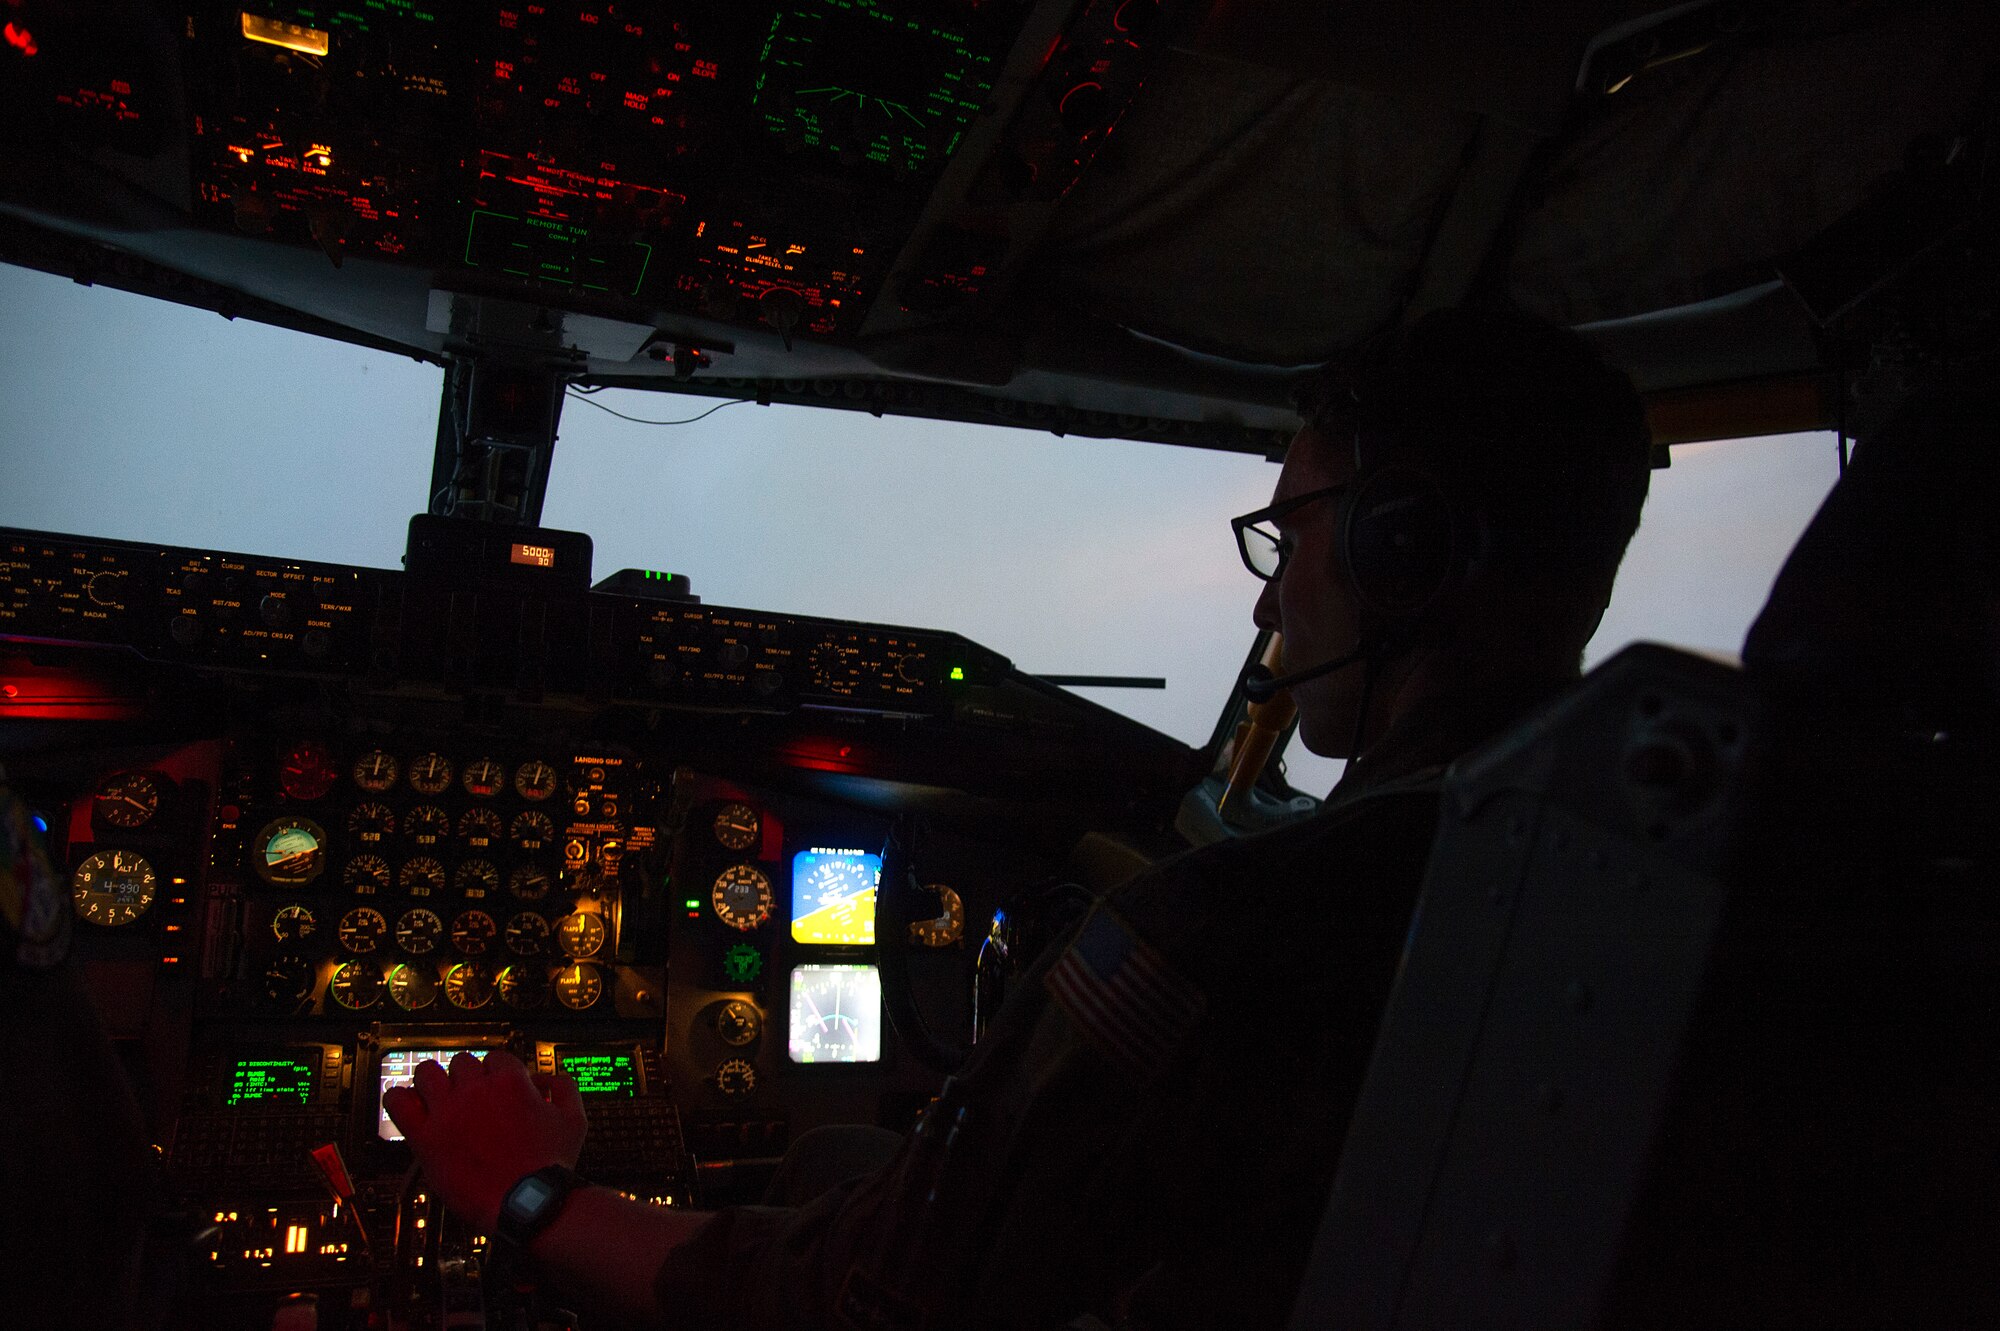 U.S. Air Force Capt. Richard Hall, a pilot assigned to the 91st Air Refueling Squadron, operates the controls of a KC-135 Stratotanker, during a training mission, Sept. 30, 2020, at MacDill Air Force Base, Fla.